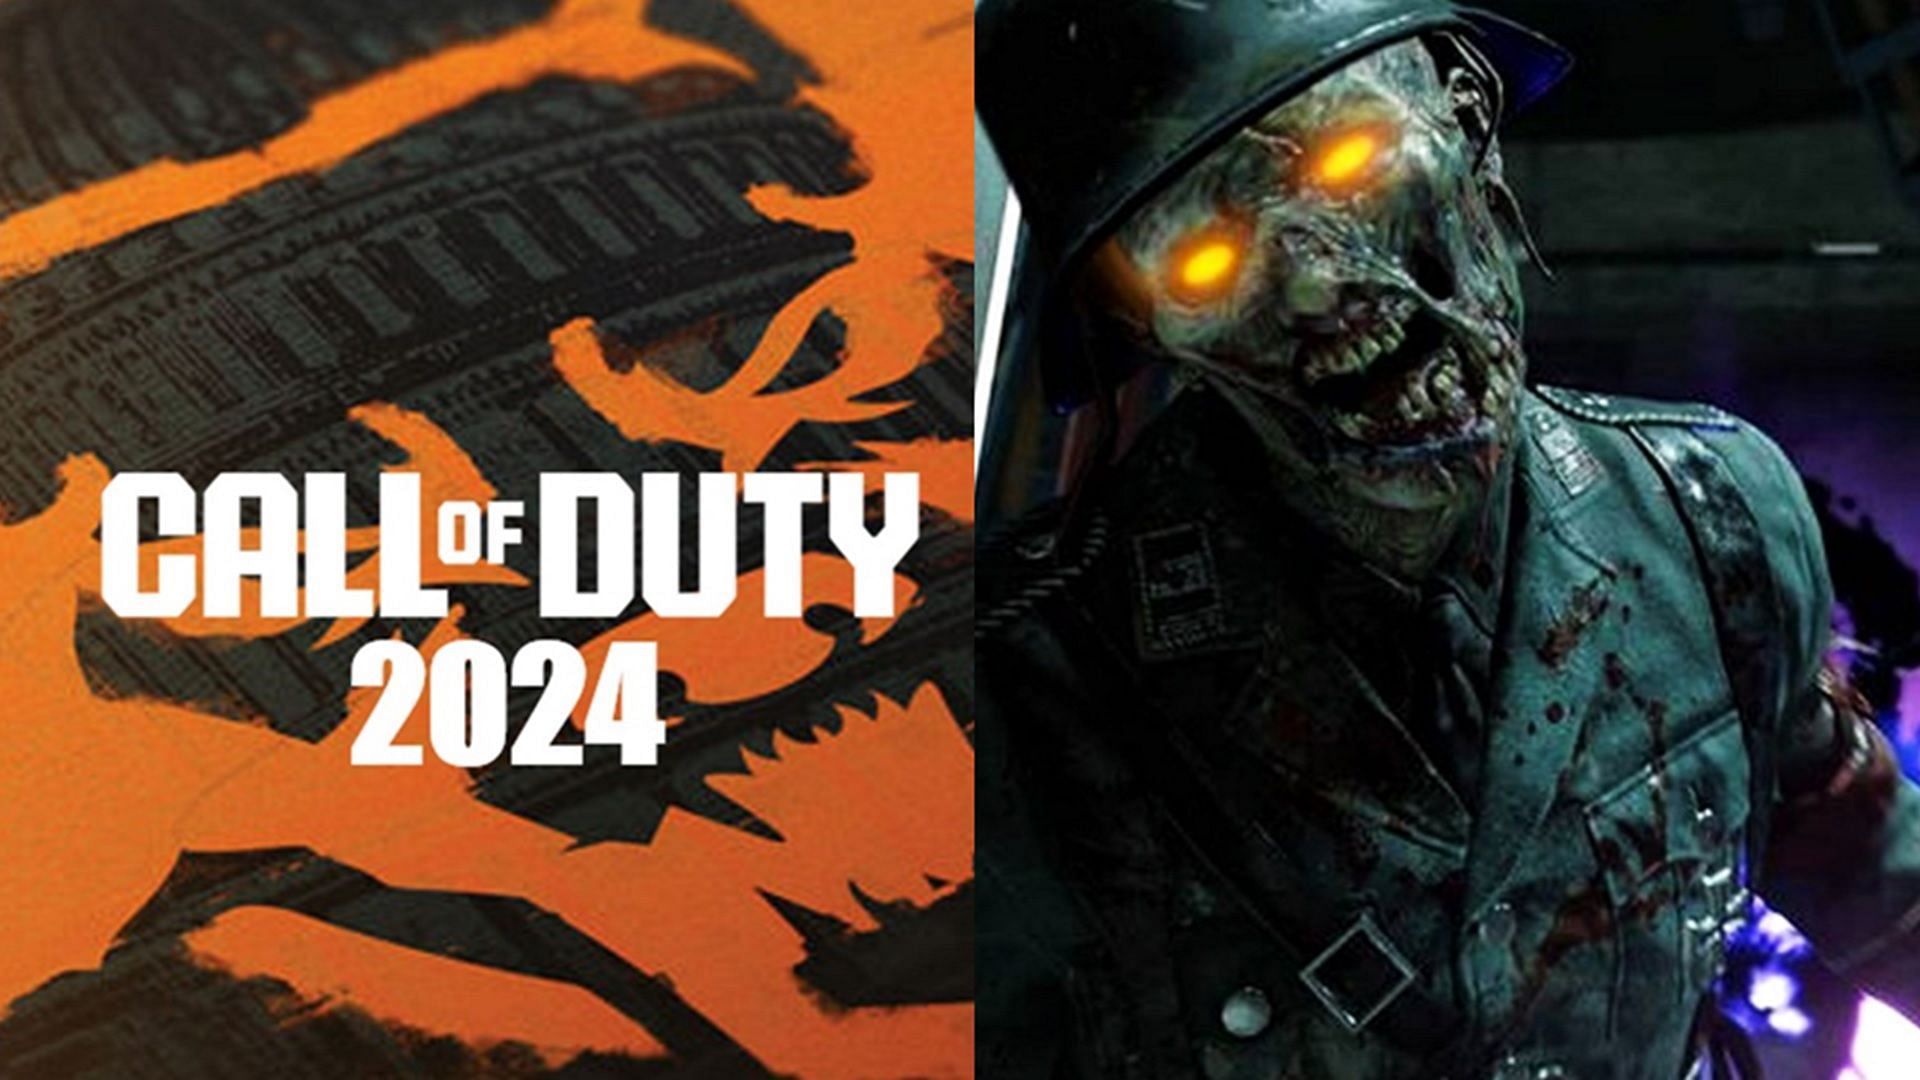 cod 2024 black ops 6 pre-order content plans have been leaked early ahead of an official announcement